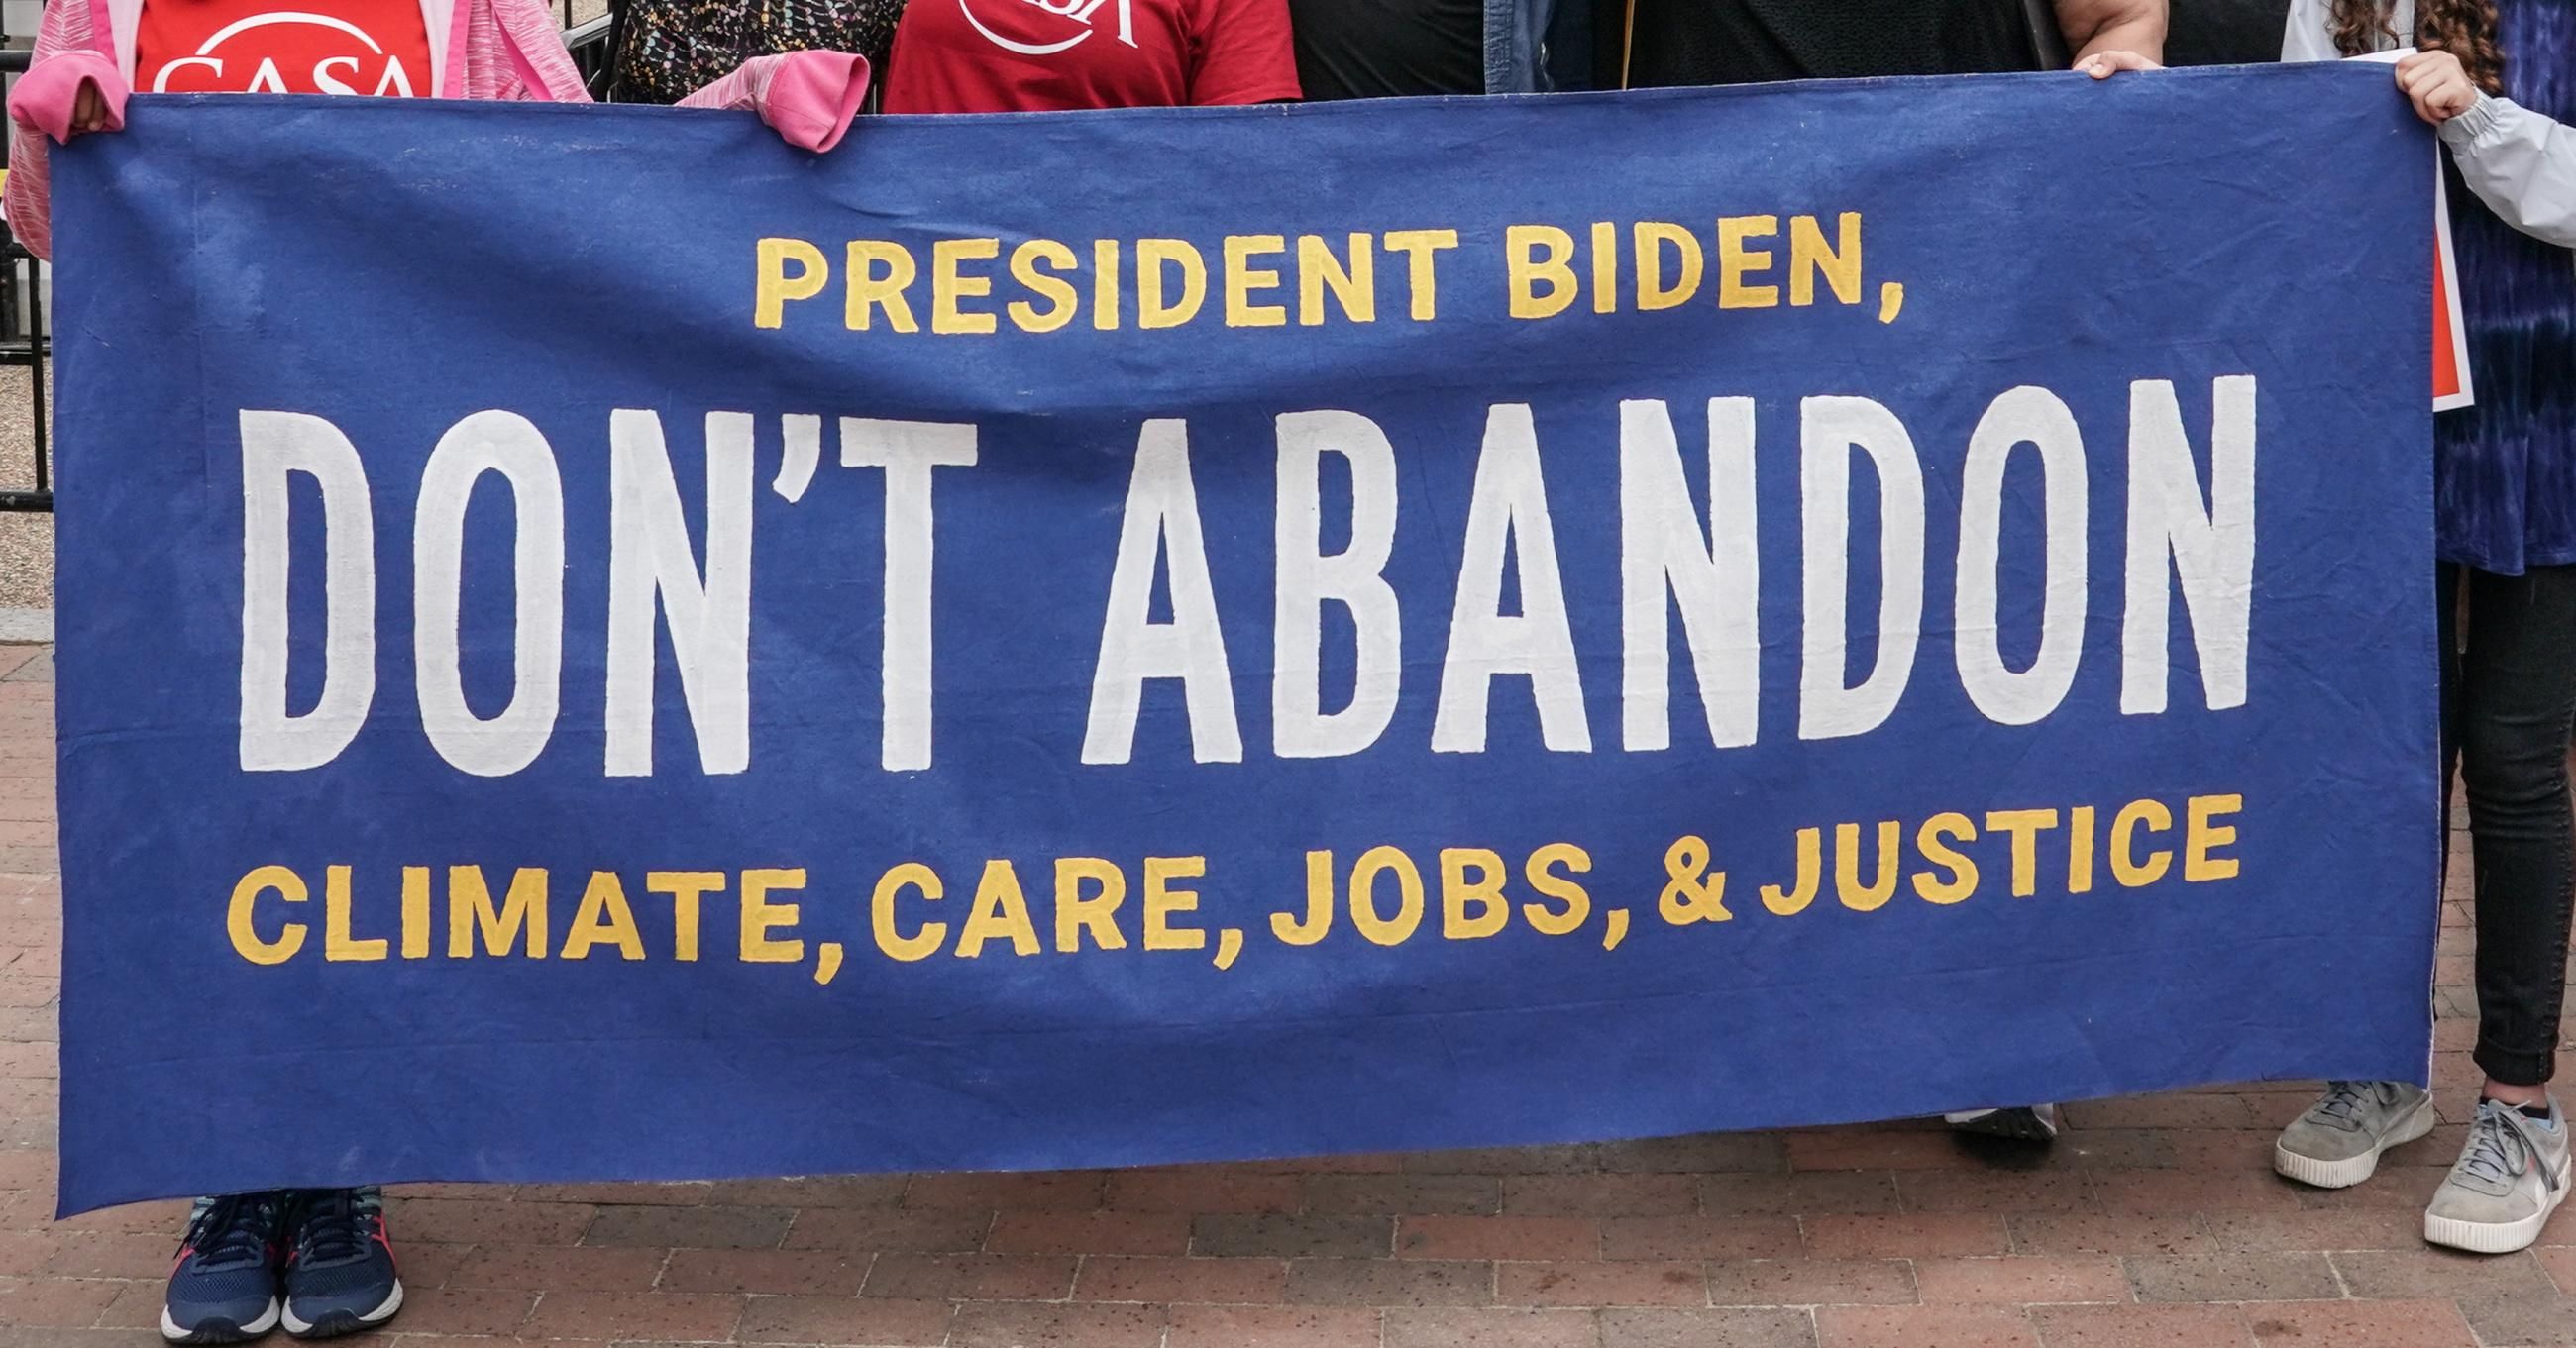 WASHINGTON, DC Progressive activists urge President Joe Biden not to compromise on election promises regarding the climate emergency, healthcare, jobs, and social justice outside the White House on May 24, 2021. (Photo: Jemal Countess/Getty Images for Green New Deal Network)